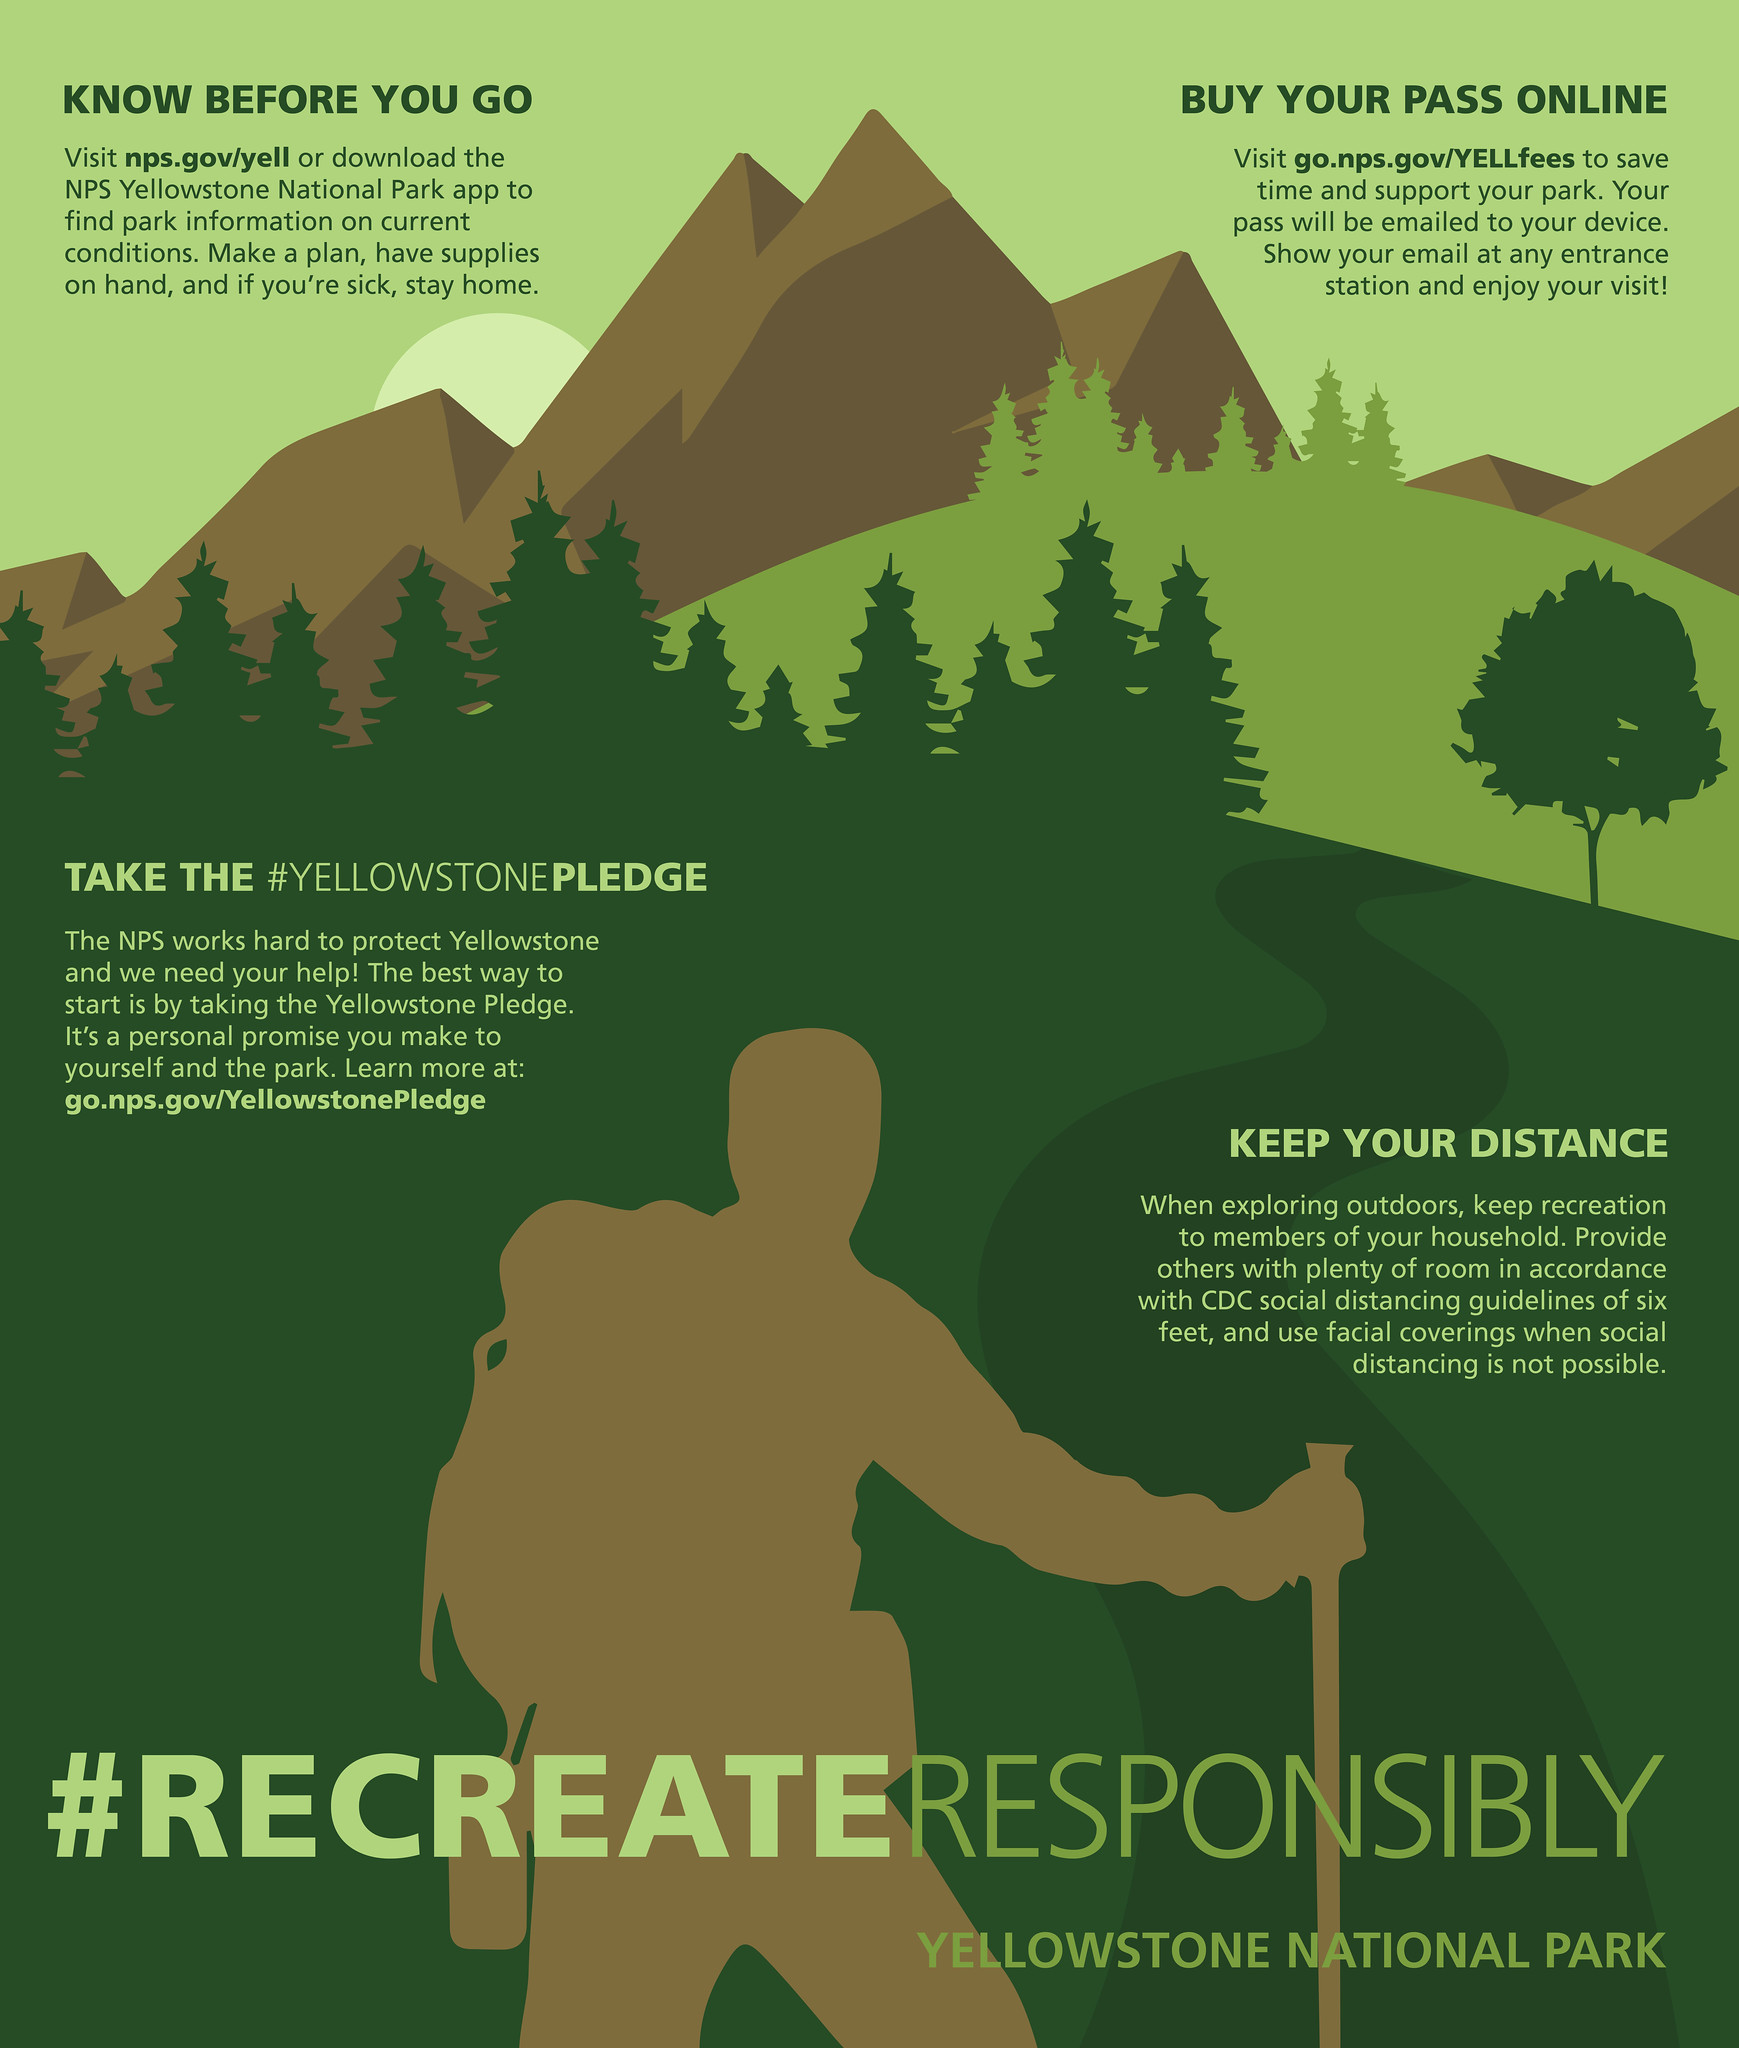 graphic poster with text with tips on how to recreate responsibly